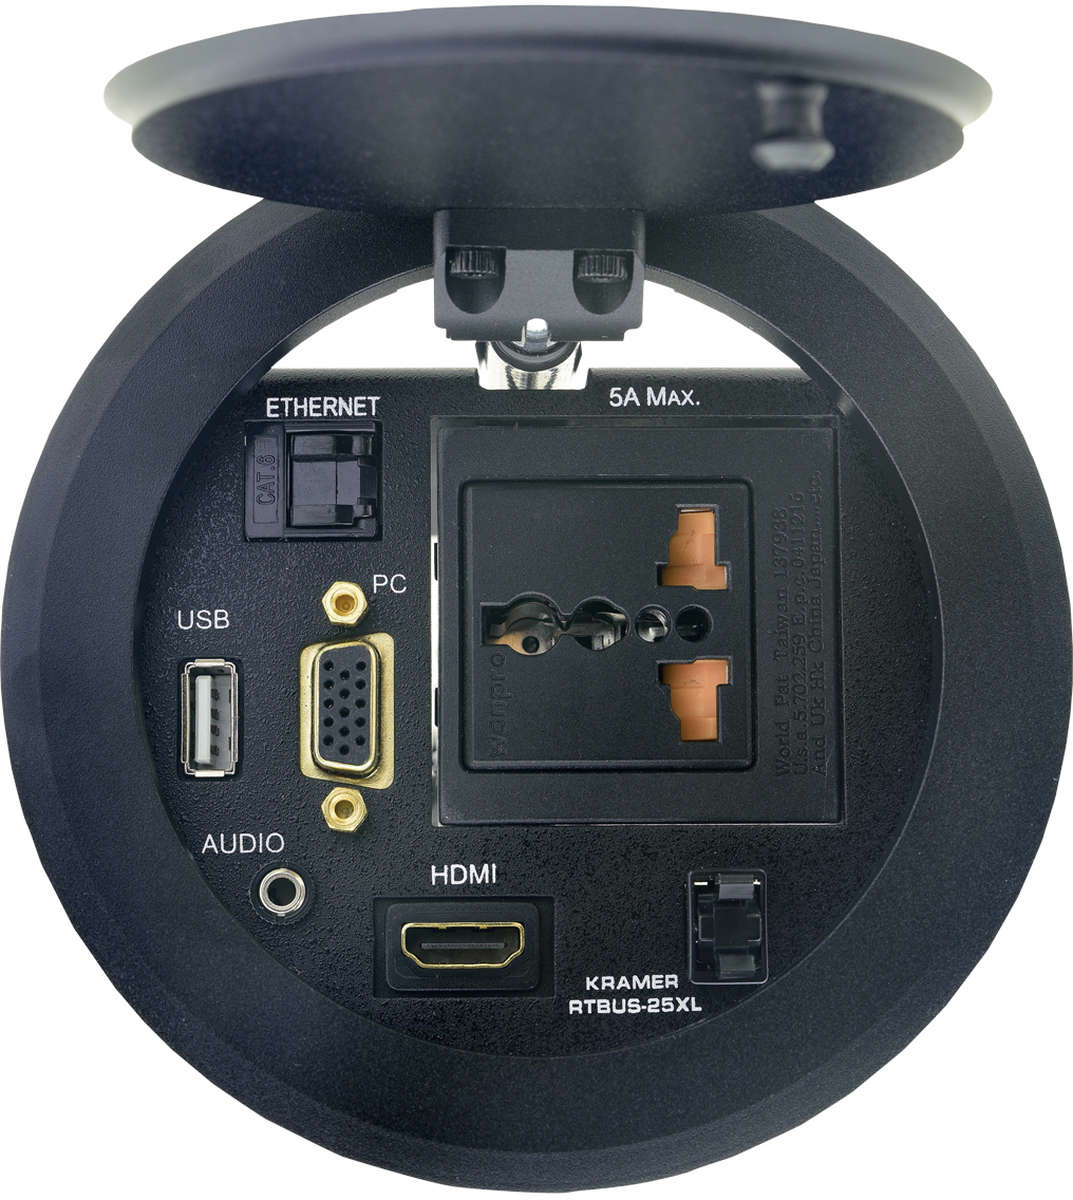 Kramer RTBUS-25xl Round Table Mount Multi Connection, 110mm cutout product image. Click to enlarge.